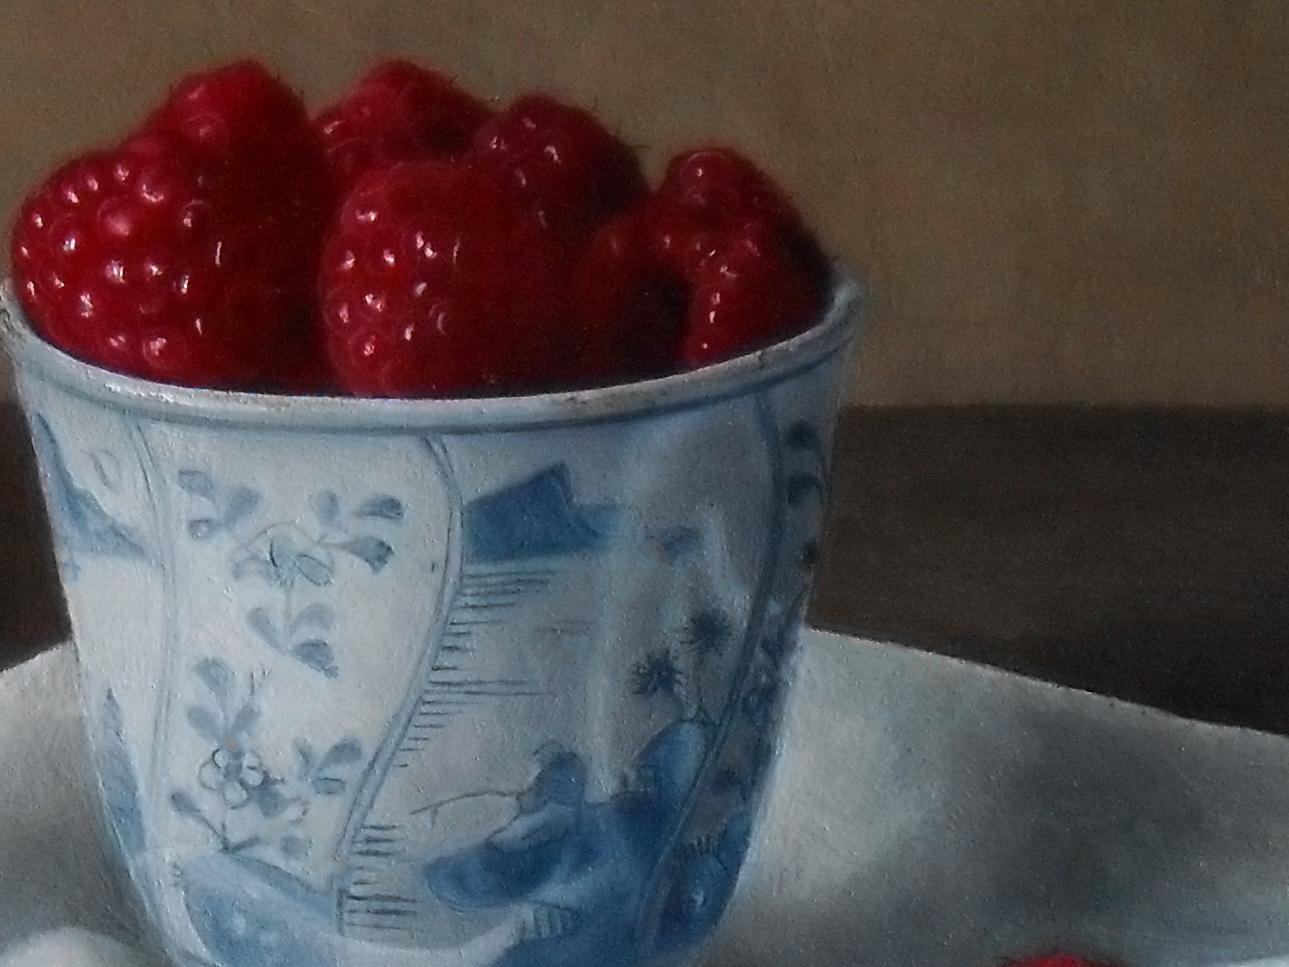 'Raspberries in a Bowl' Contemporary Still Life painting, dutch masters inspired - Painting by Barbara Vanhove